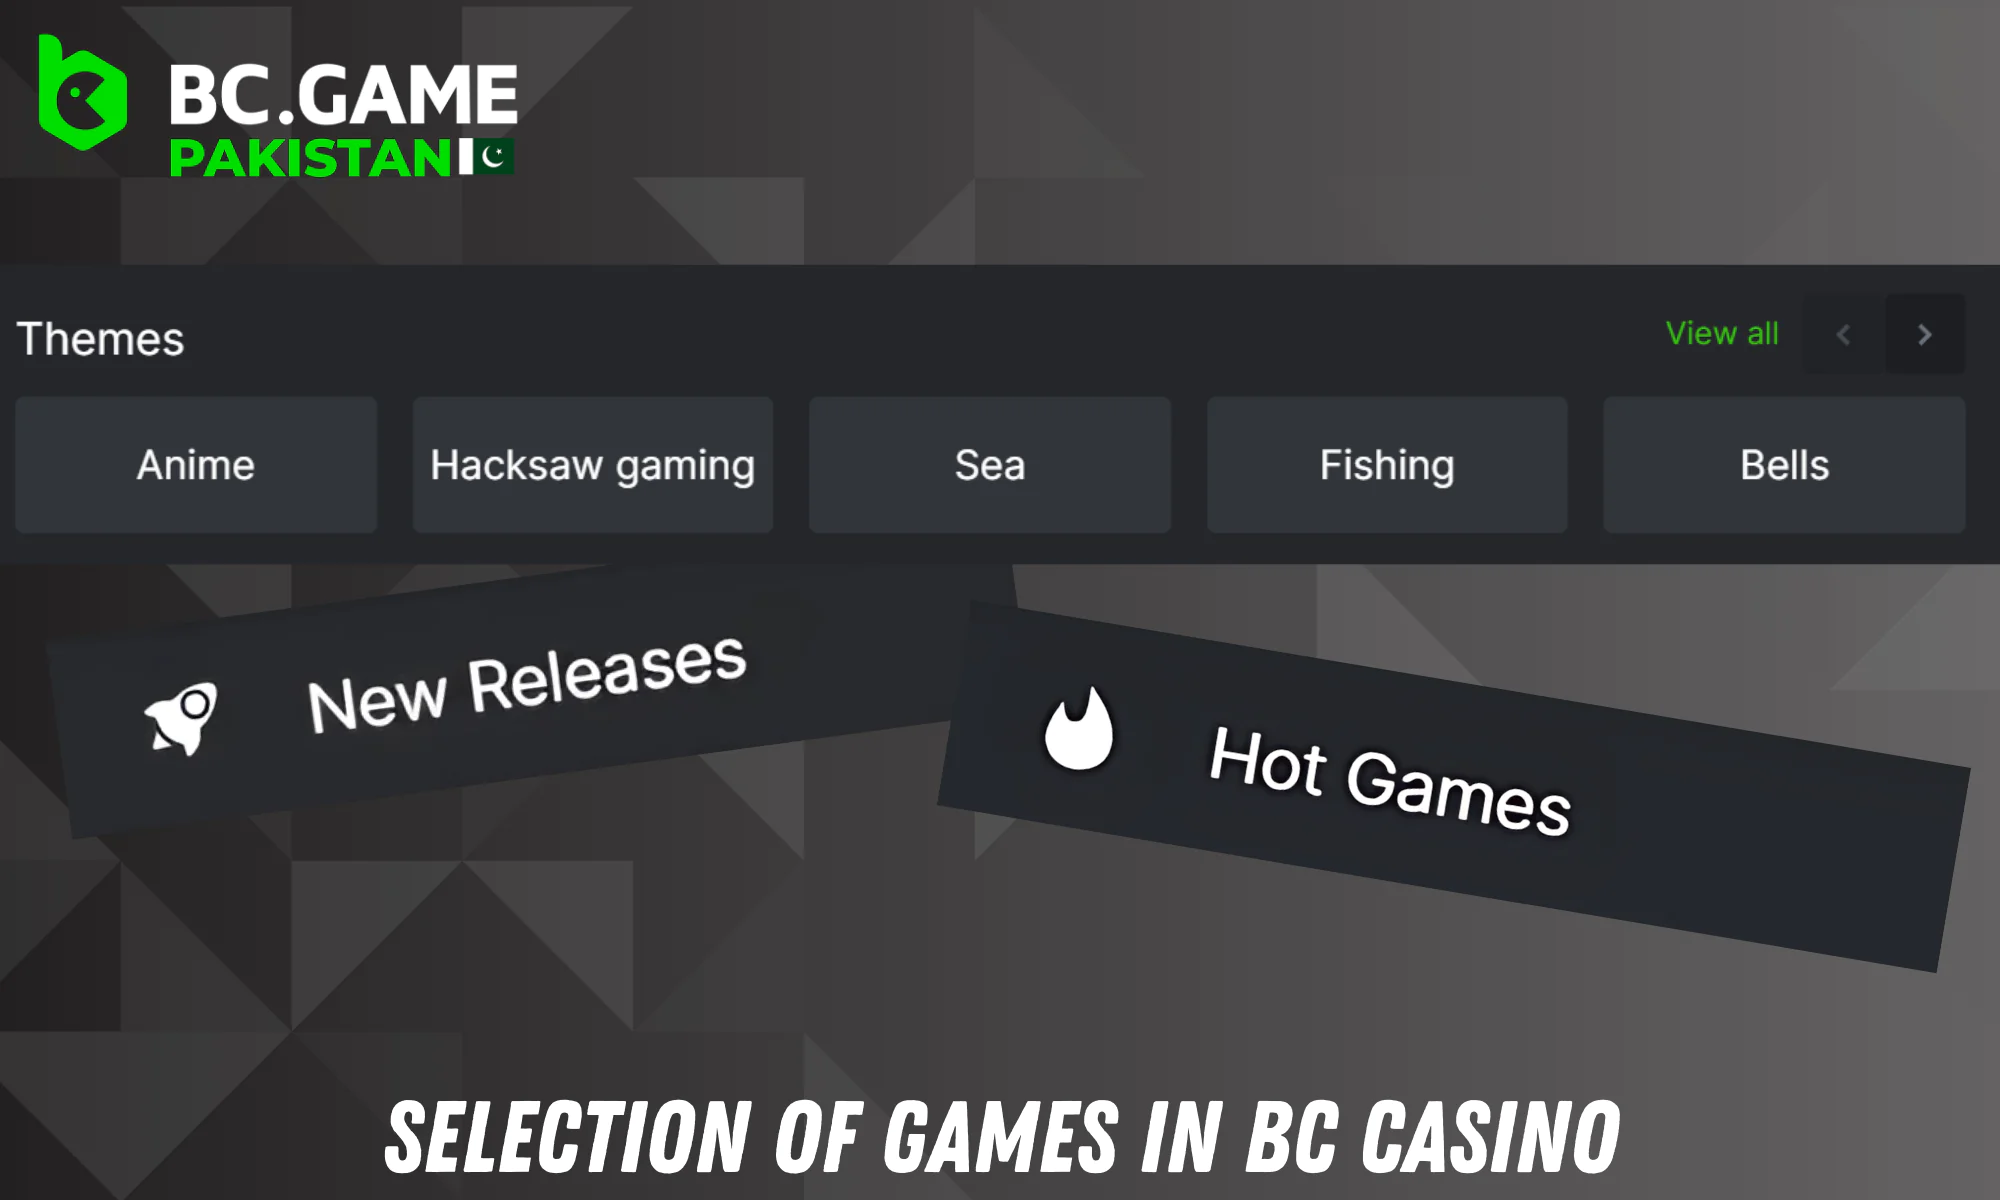 BC Gaming organizes rich collections of games in different categories